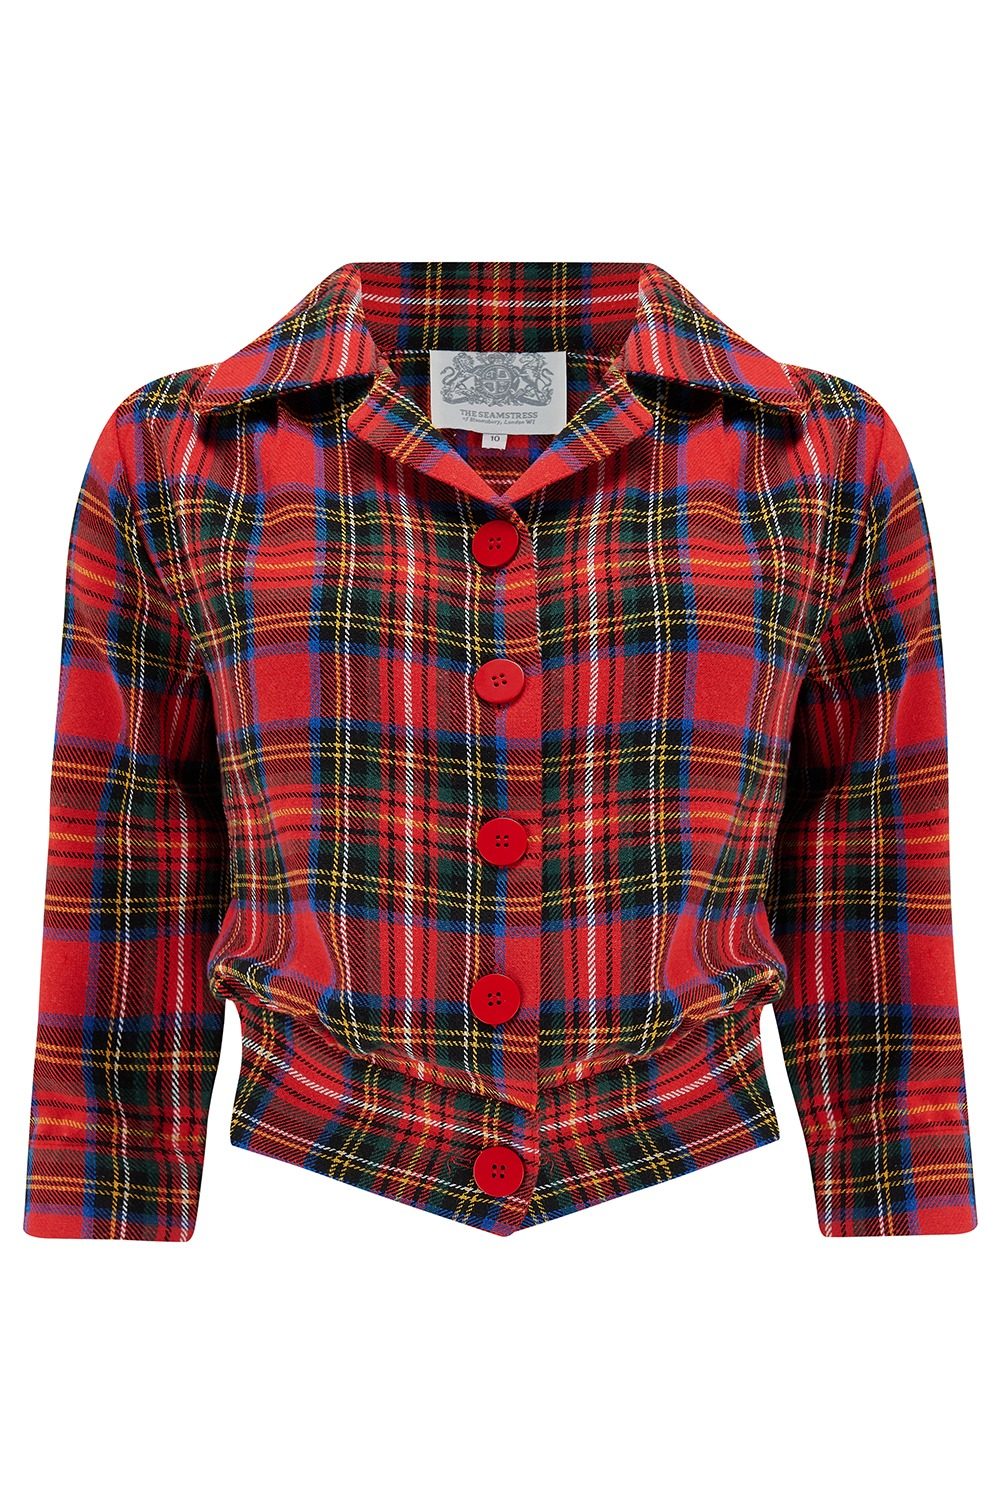 50s Shirts & Tops | 1950s Blouses & Knitwear Marion Blouse in 100 Cotton Red Plaid Tartan Authentic  Classic 1940s Vintage Inspired Style £45.95 AT vintagedancer.com